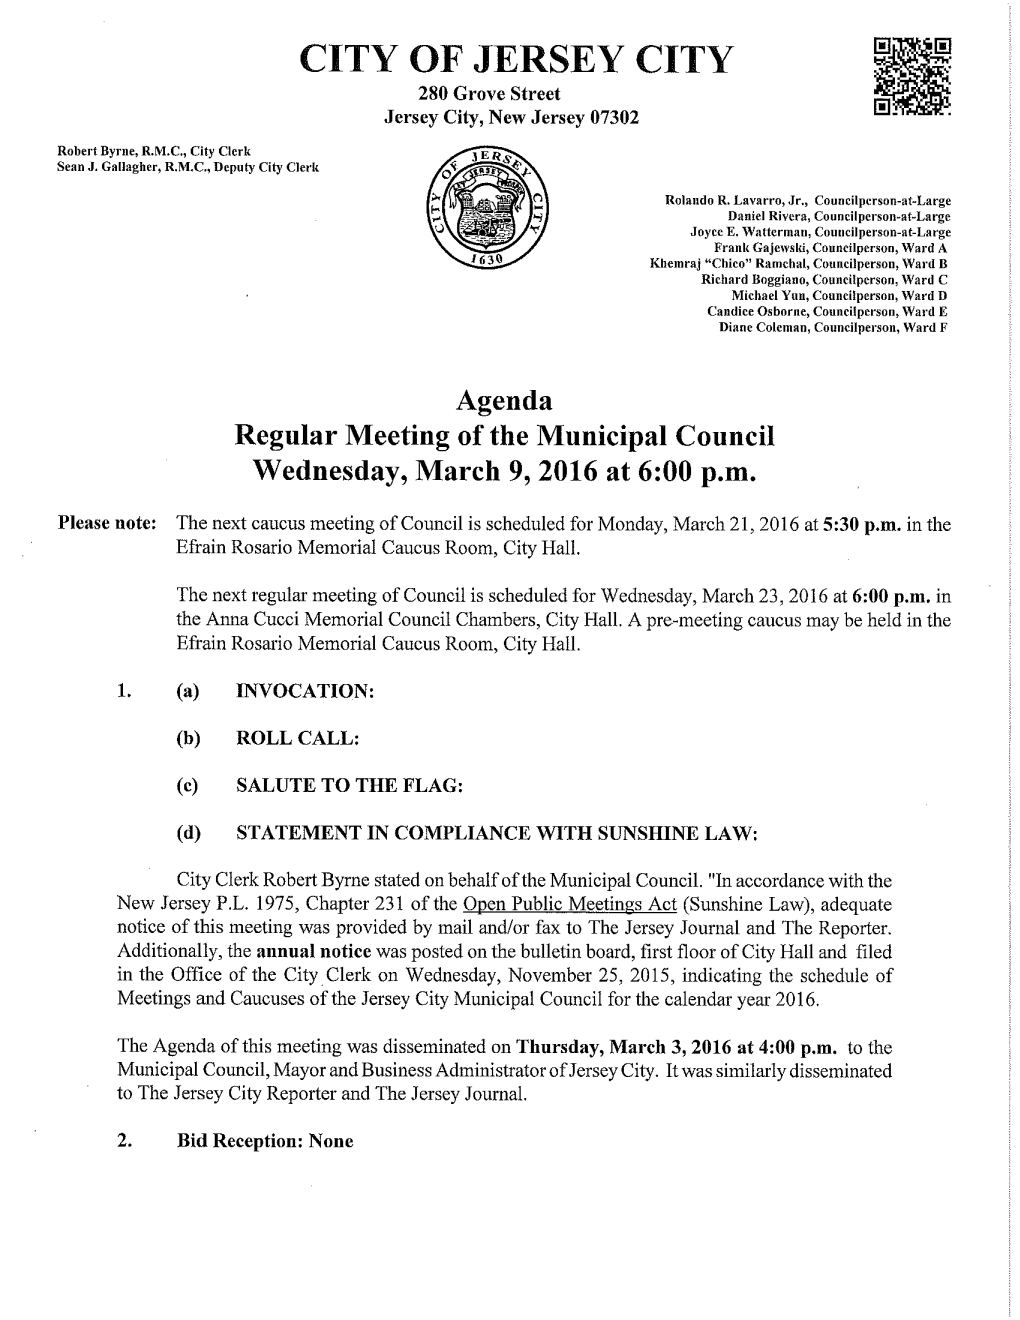 Agenda Regular Meeting of the Municipal Council Wednesday, March 9, 2016 at 6:00 P.M